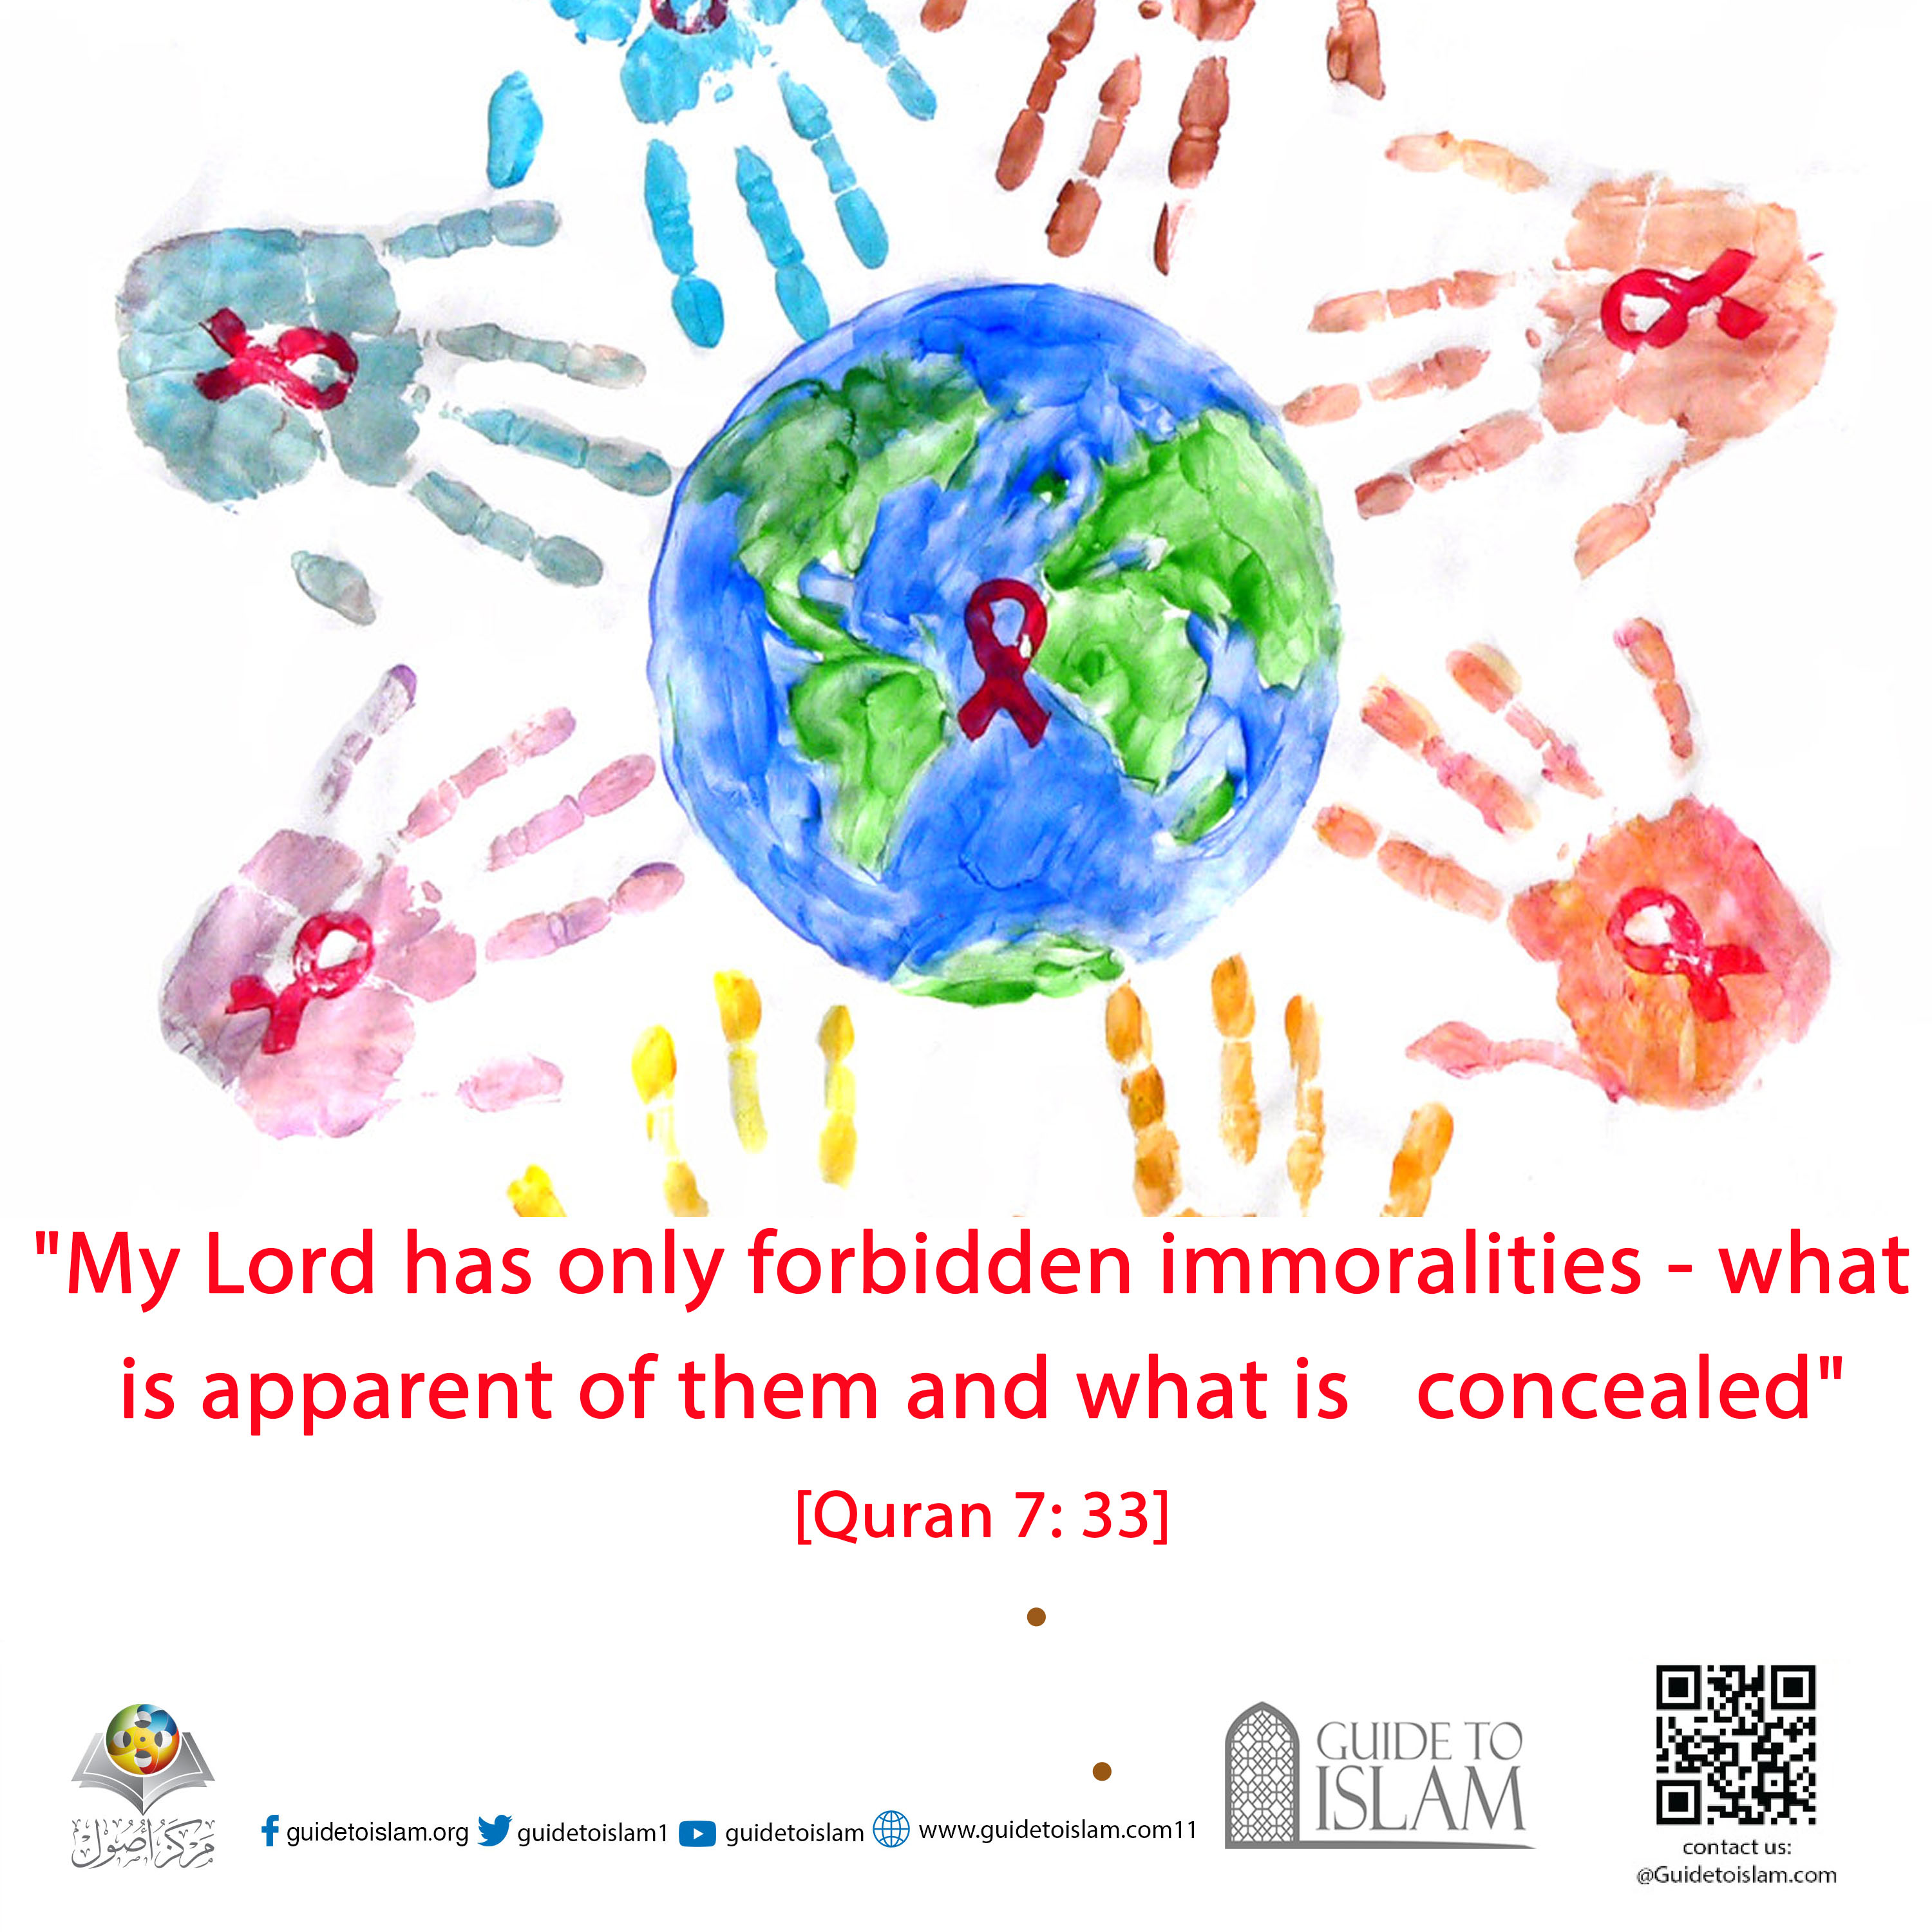 "My Lord has only forbidden immoralities"